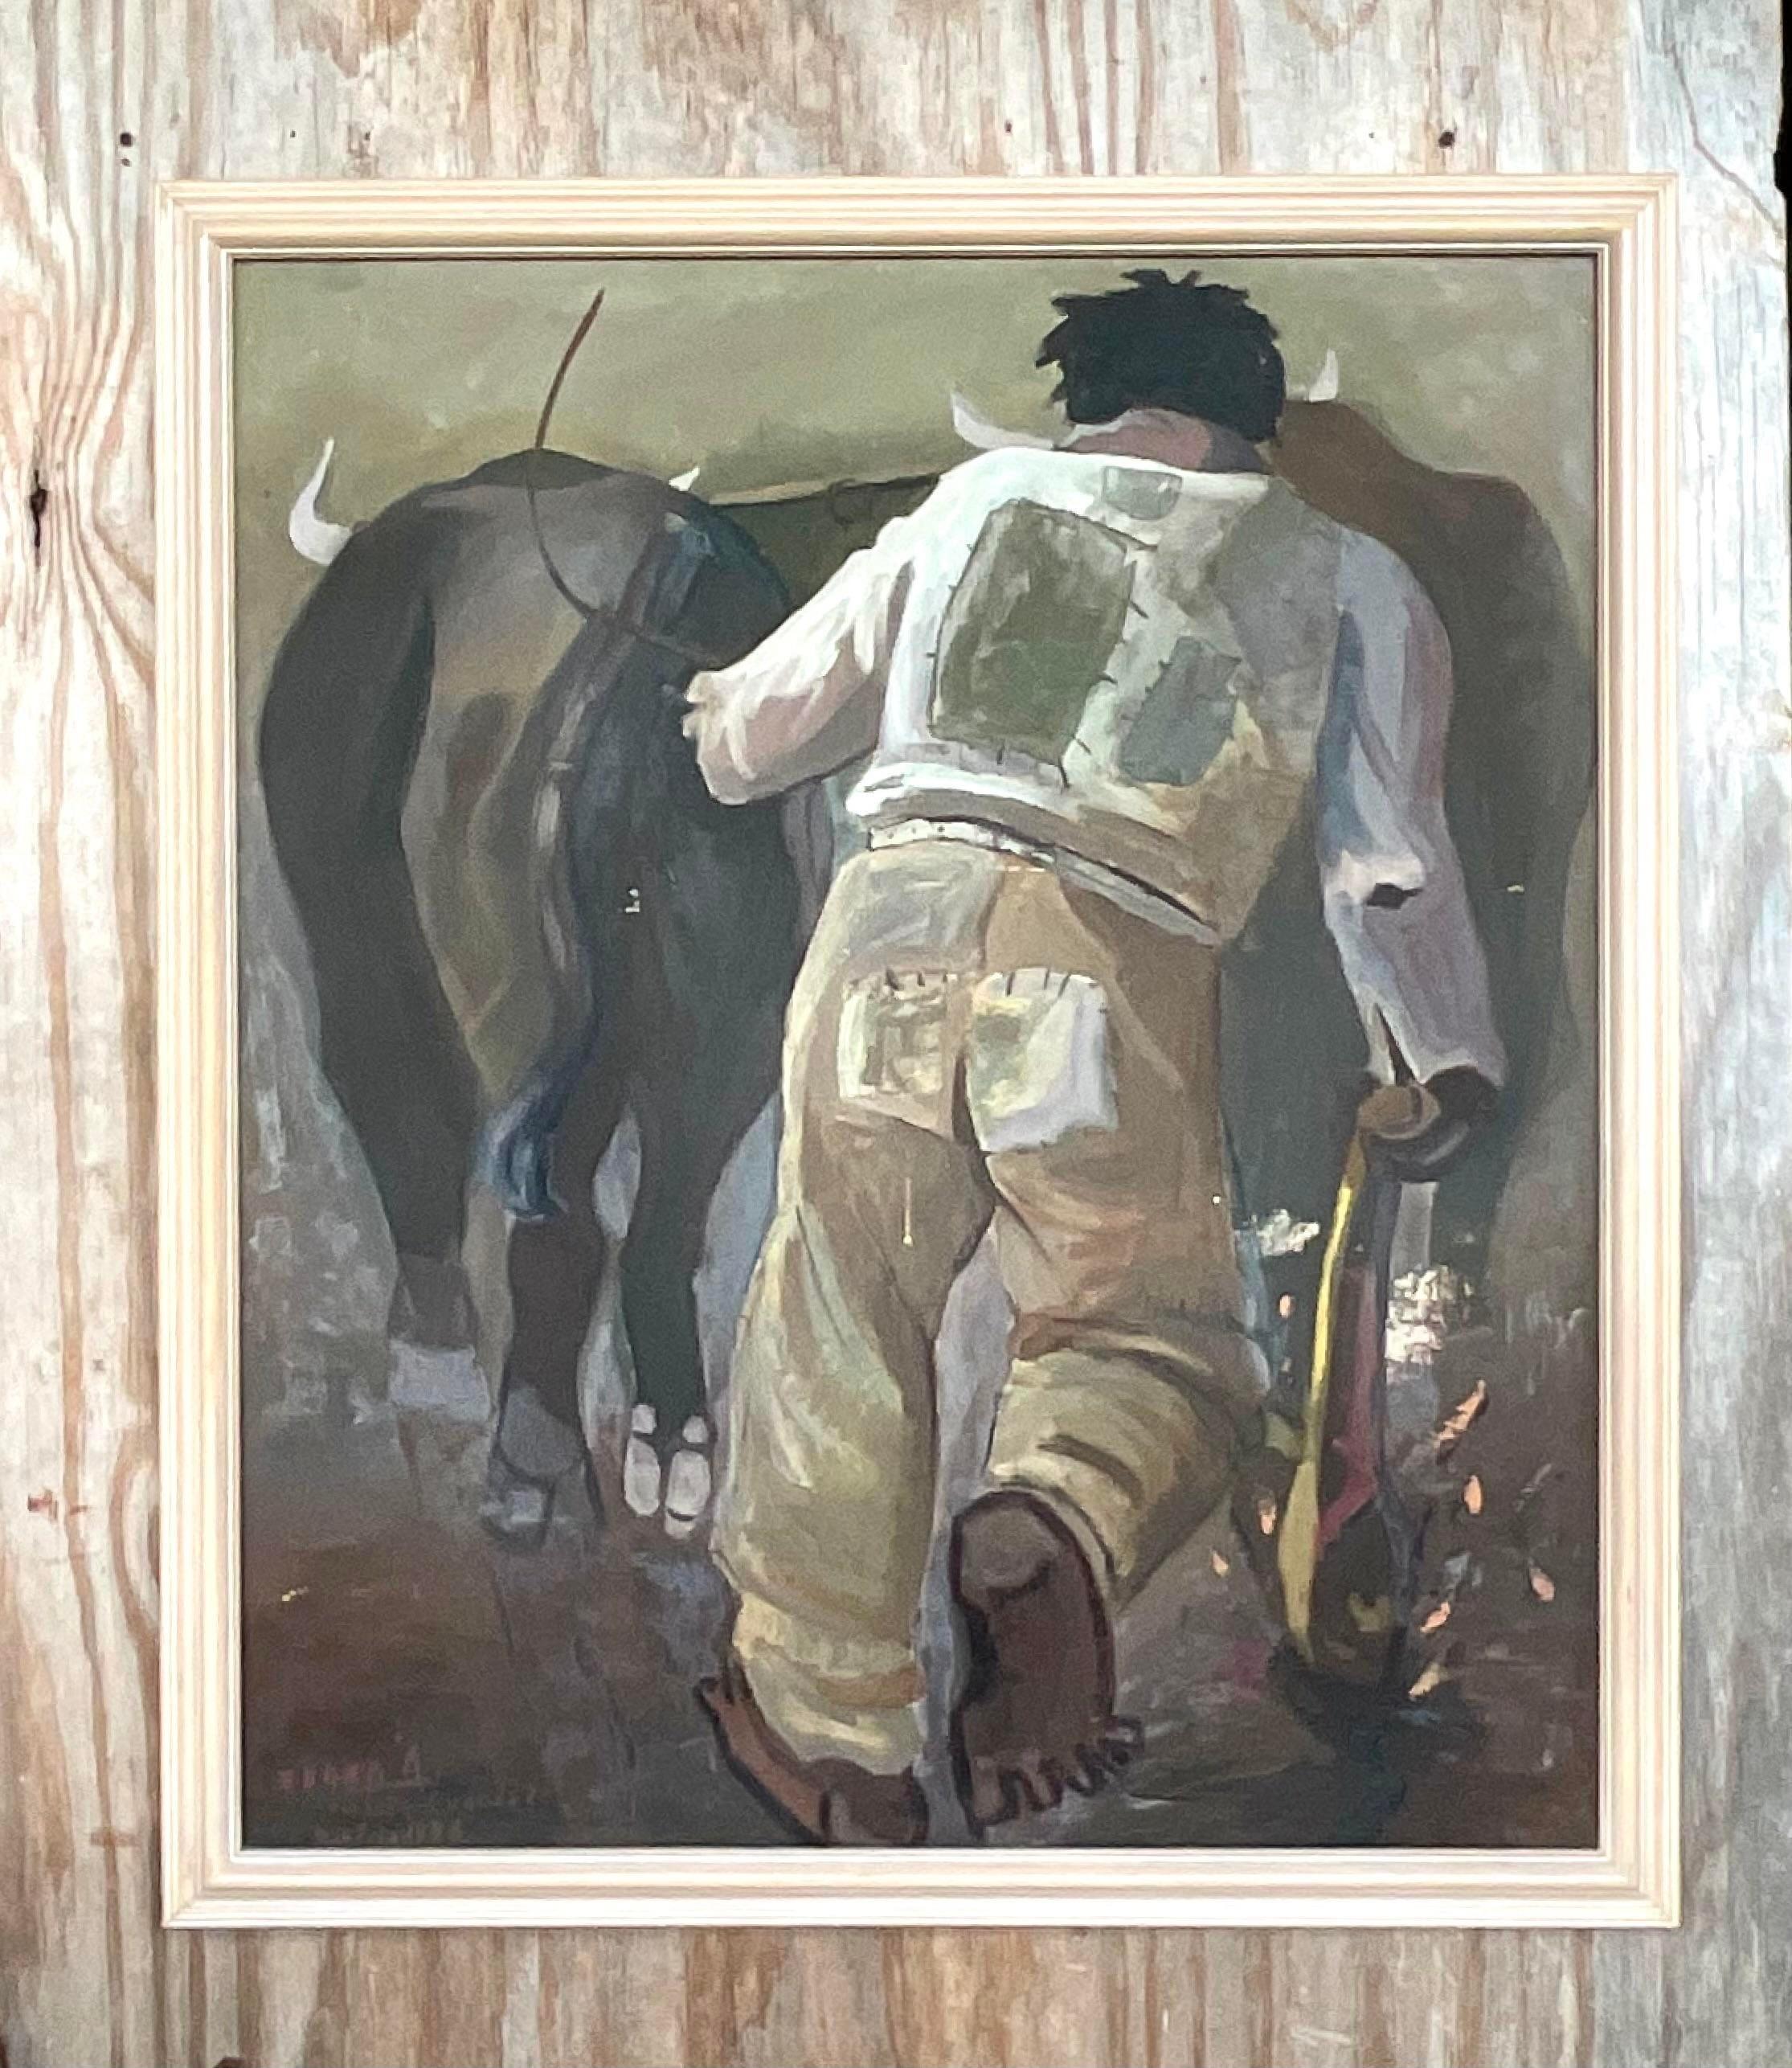 A fantastic vintage Boho original oil painting. A chic total composition of a man and his cattle. Signed by the Bolivian artist Alvarado and dated 1985. Acquired from a Palm Beach estate. 